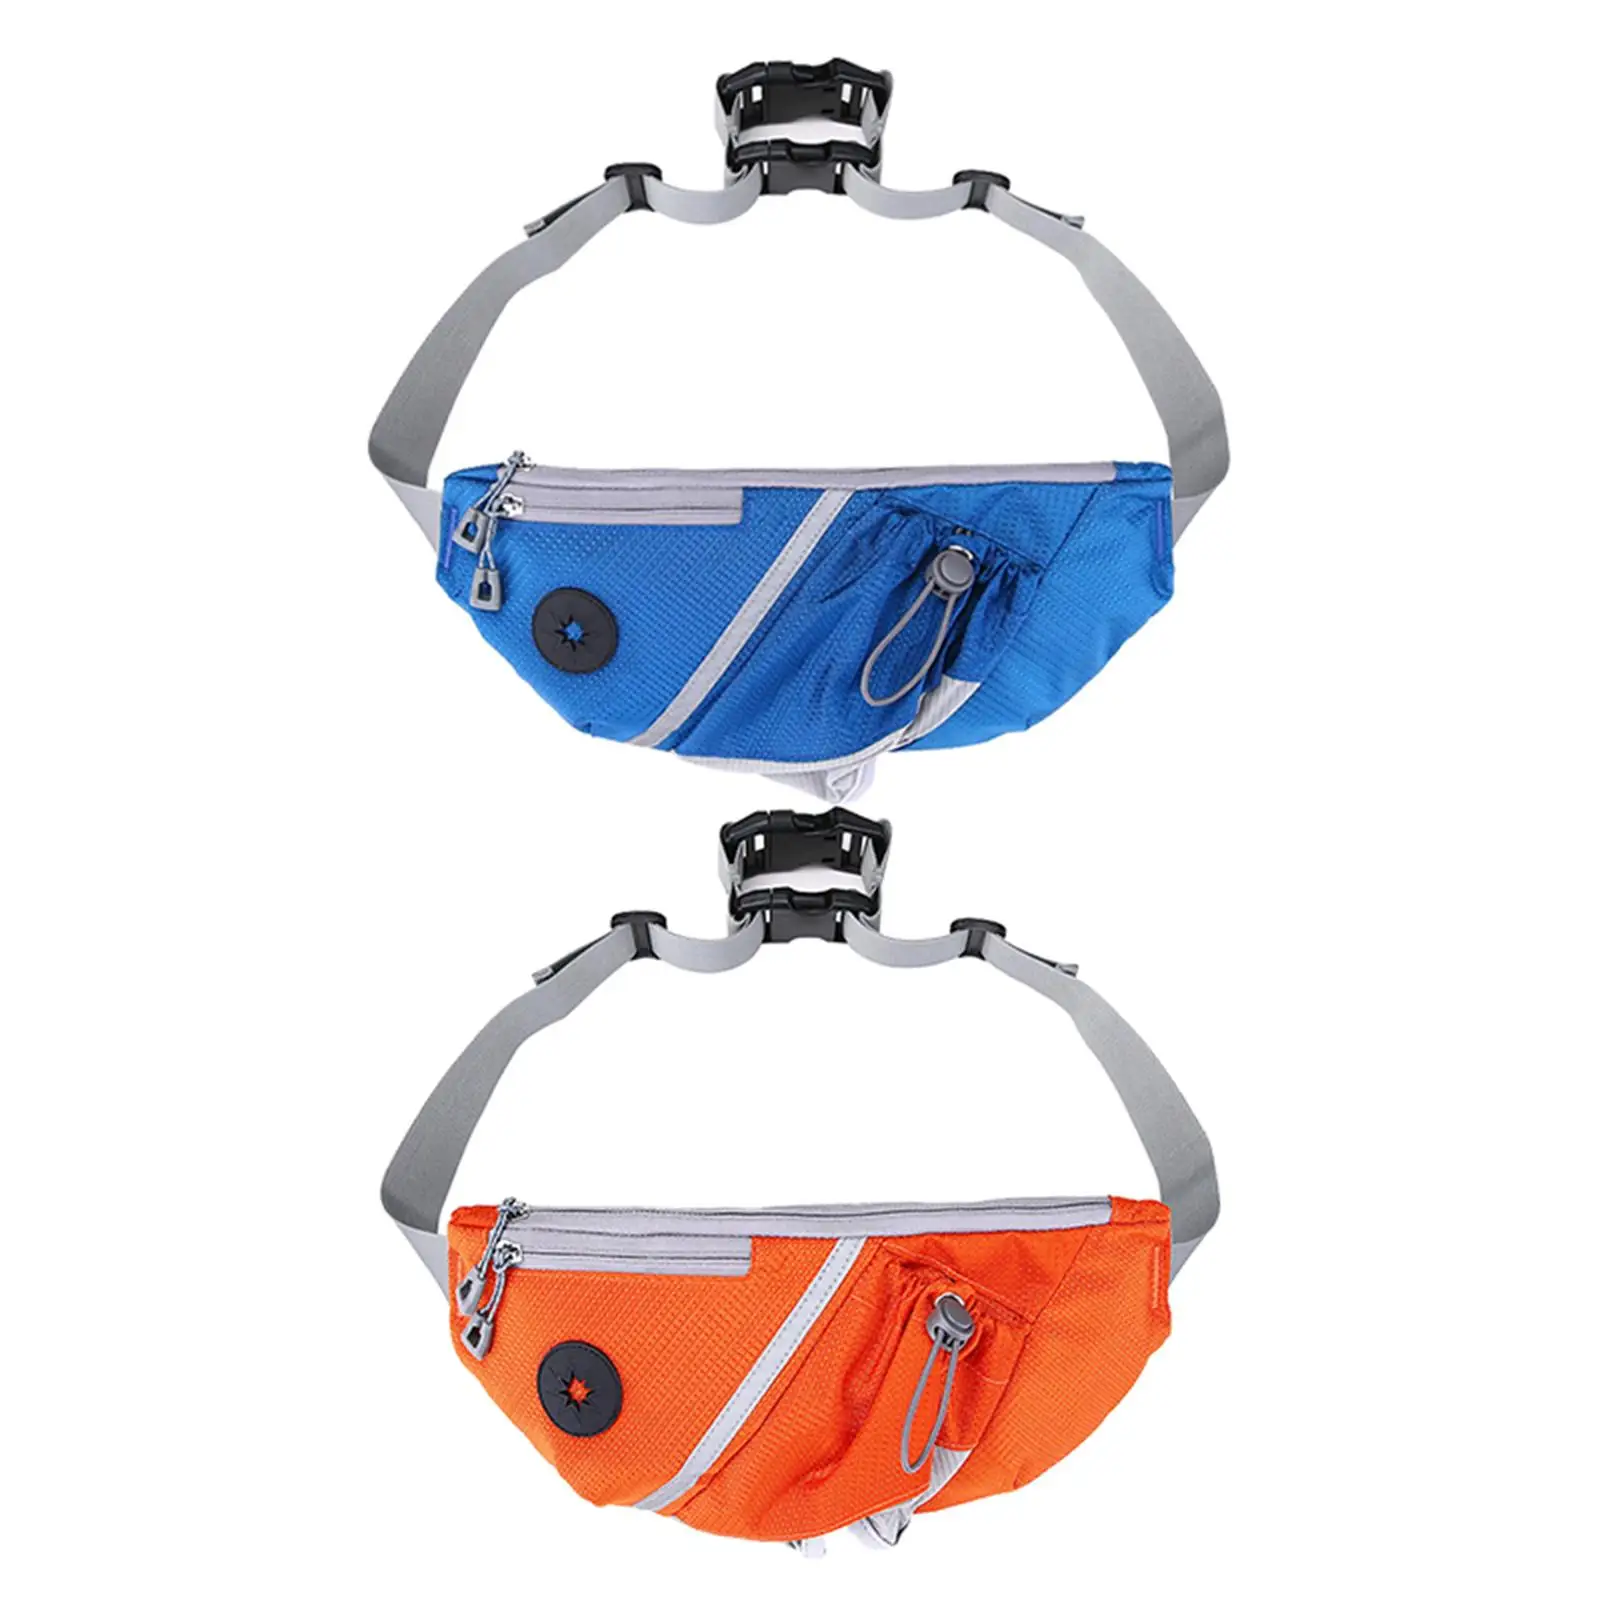 Running Dog Training Waist Bag Fanny Pack Puppy Treat Pouch Fit many Leashes